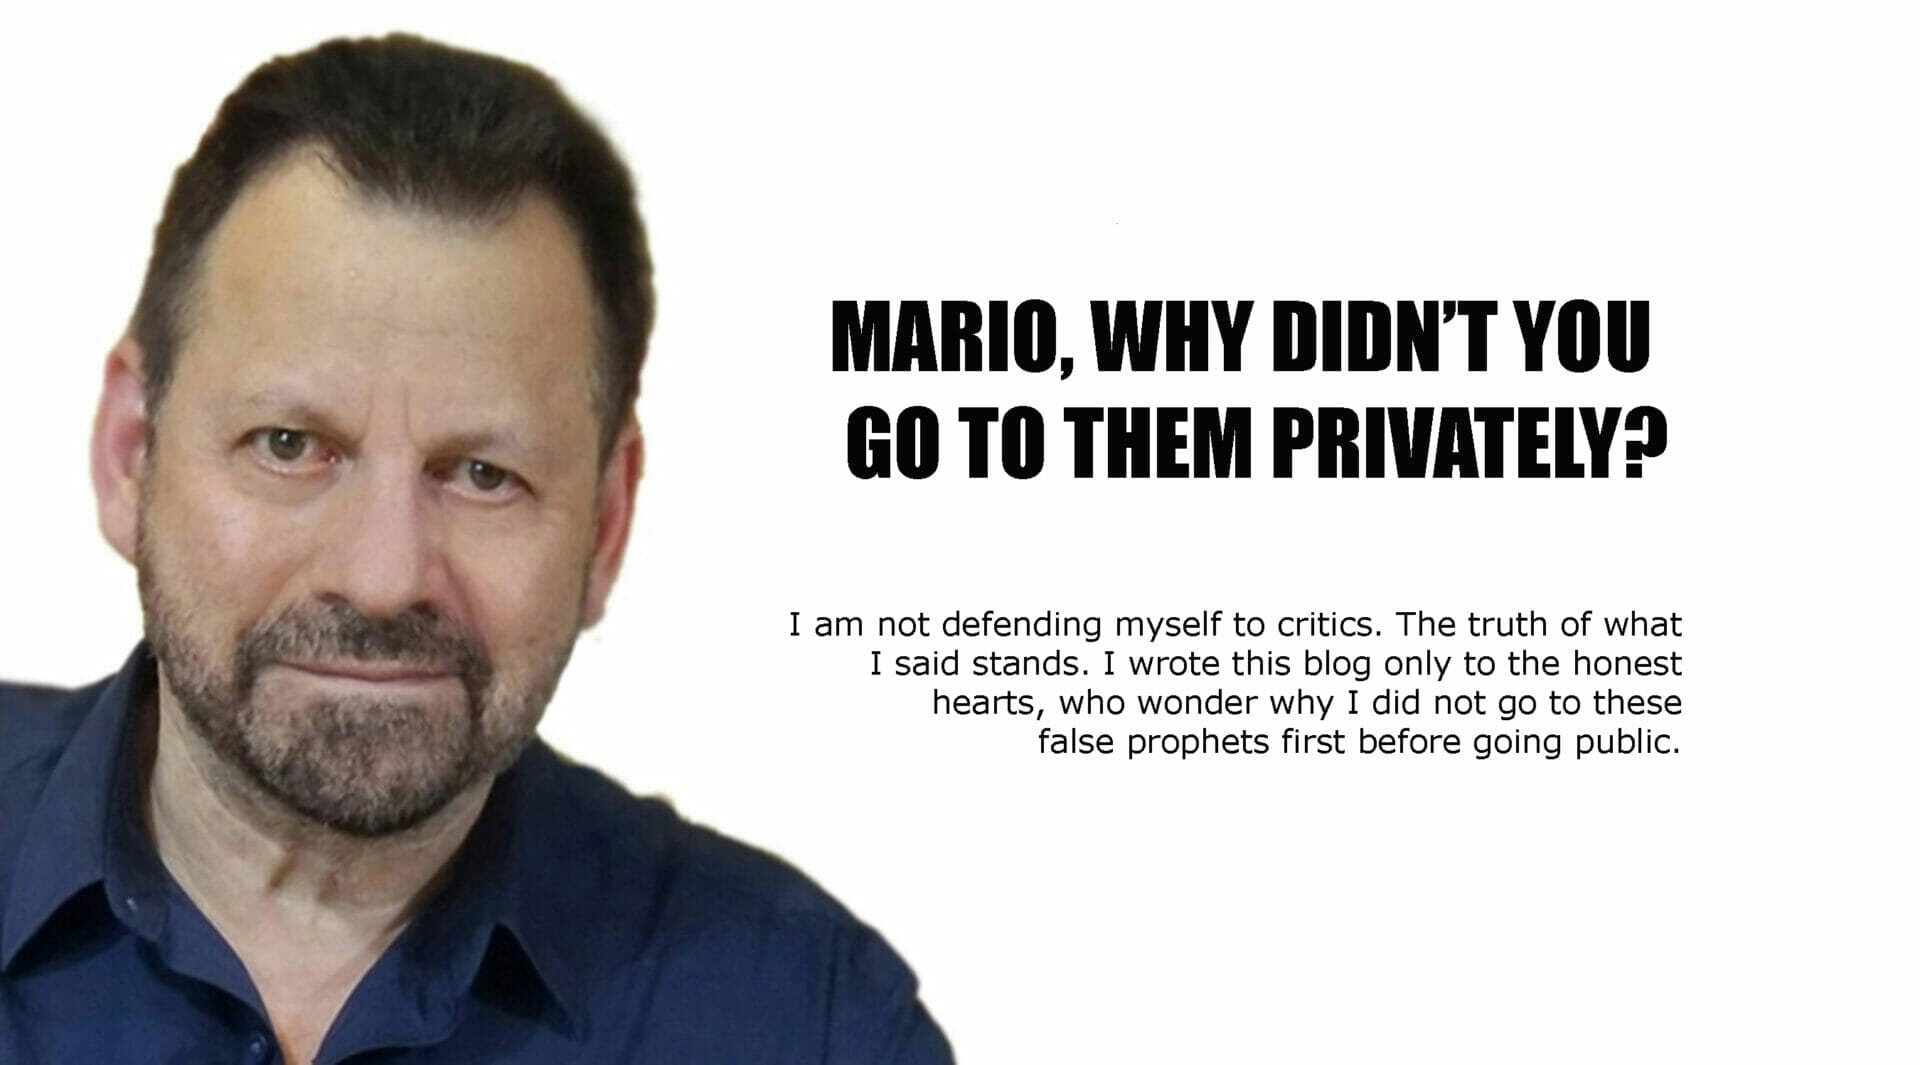 Why didnt you go to them privately?